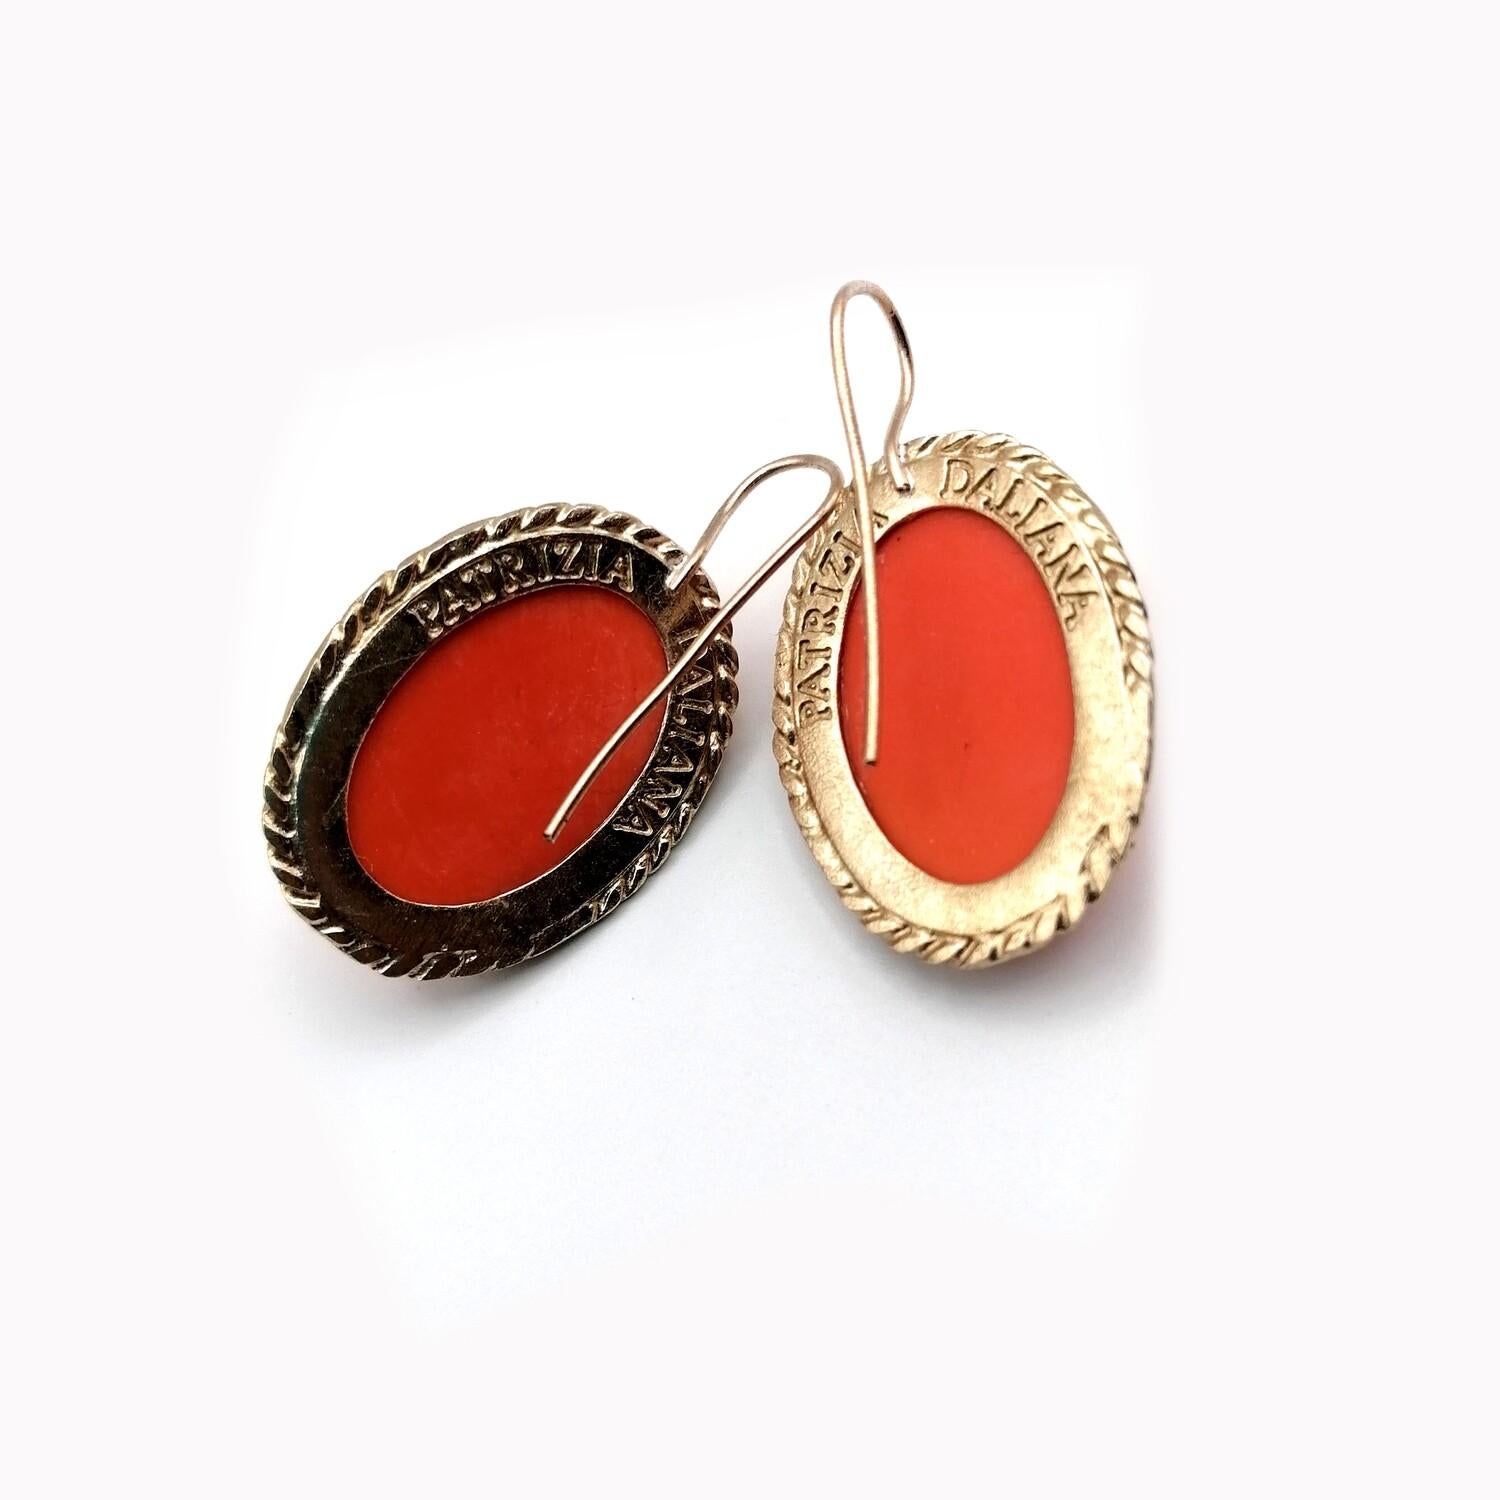 Bronze earrings, with Cameo Murano glass, representing ancient Roman woman's head. For the ear is used a bronze wire properly modeled. To fix the stones to our jewels, according to the Italian goldsmith's tradition, we use the technique of setting